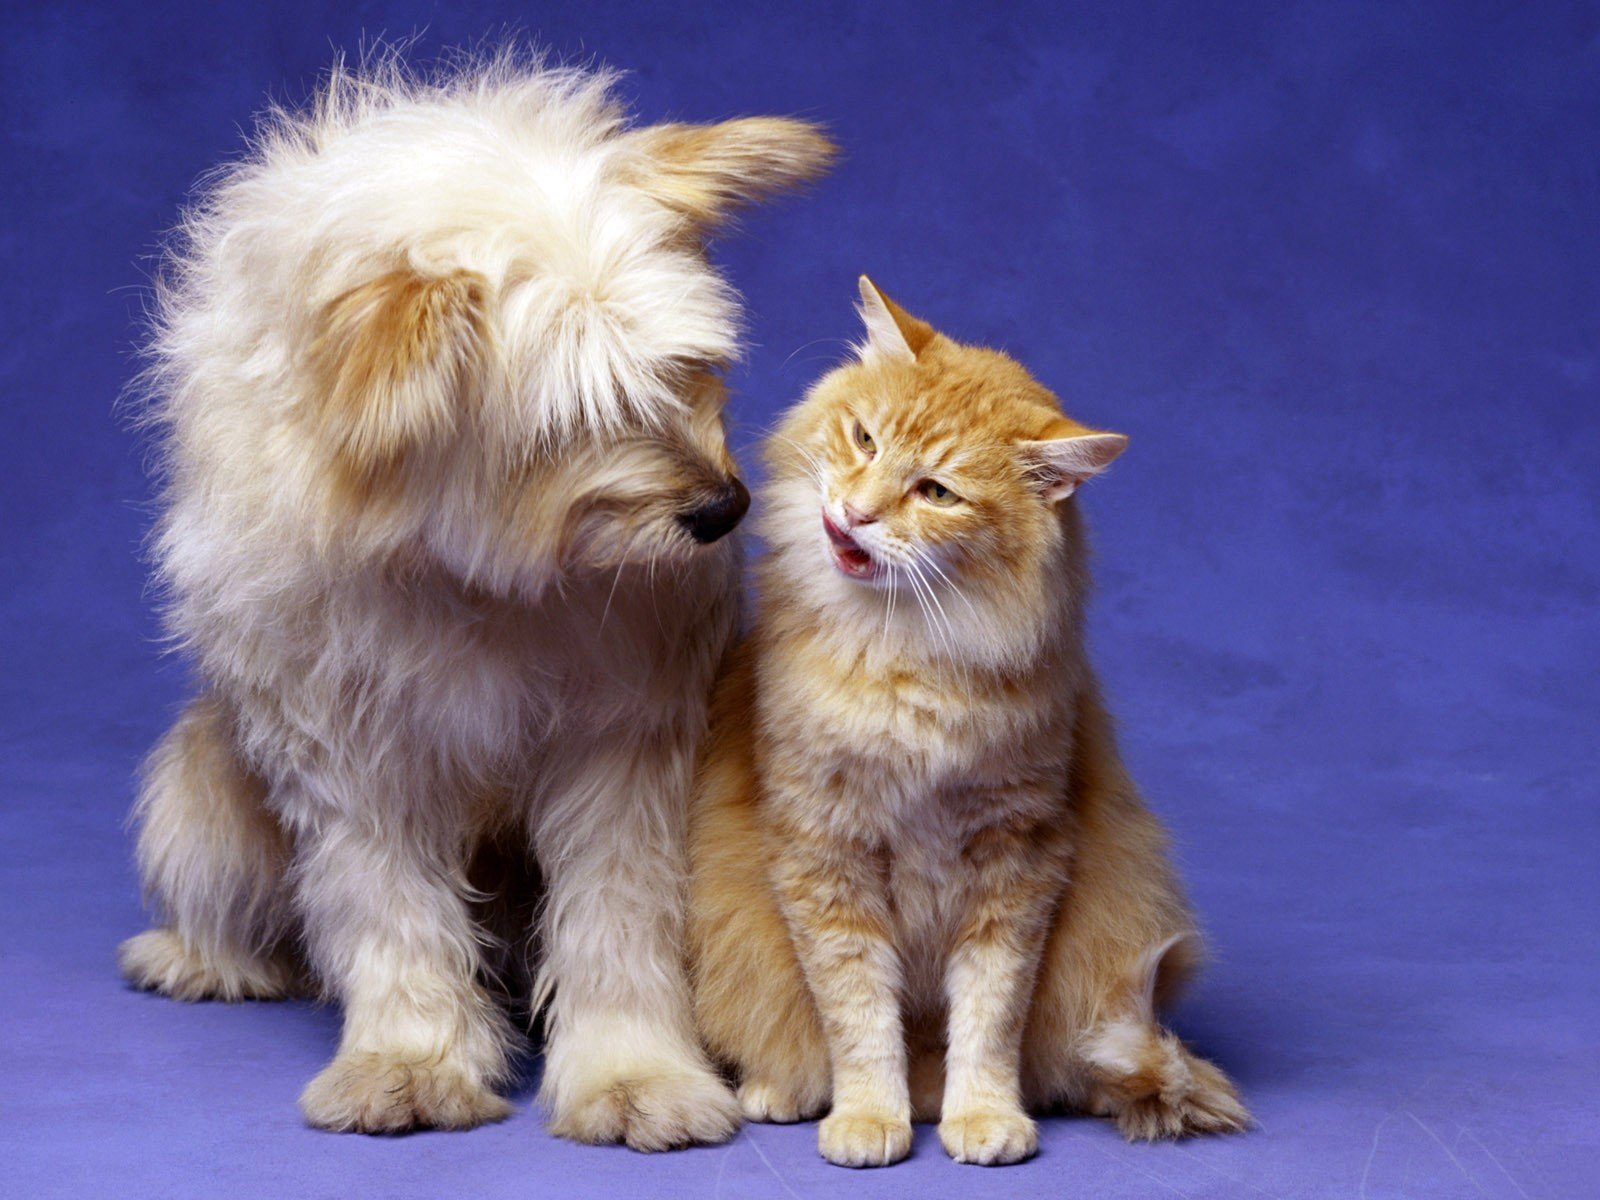 cats, Animals, Dogs Wallpaper